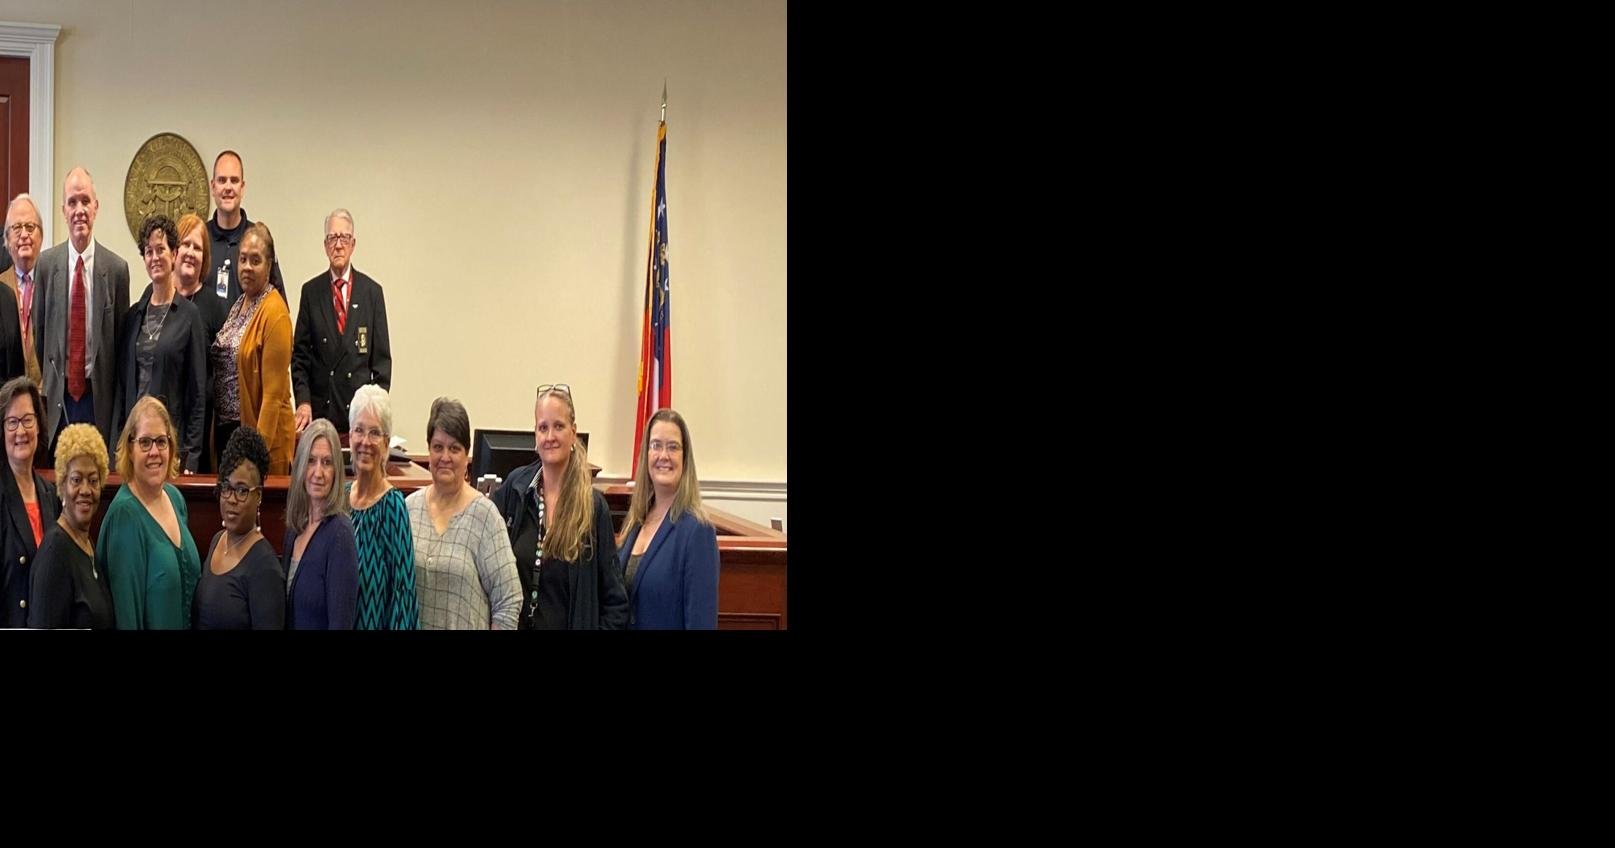 Coweta State Court recognized by Judicial Council of News